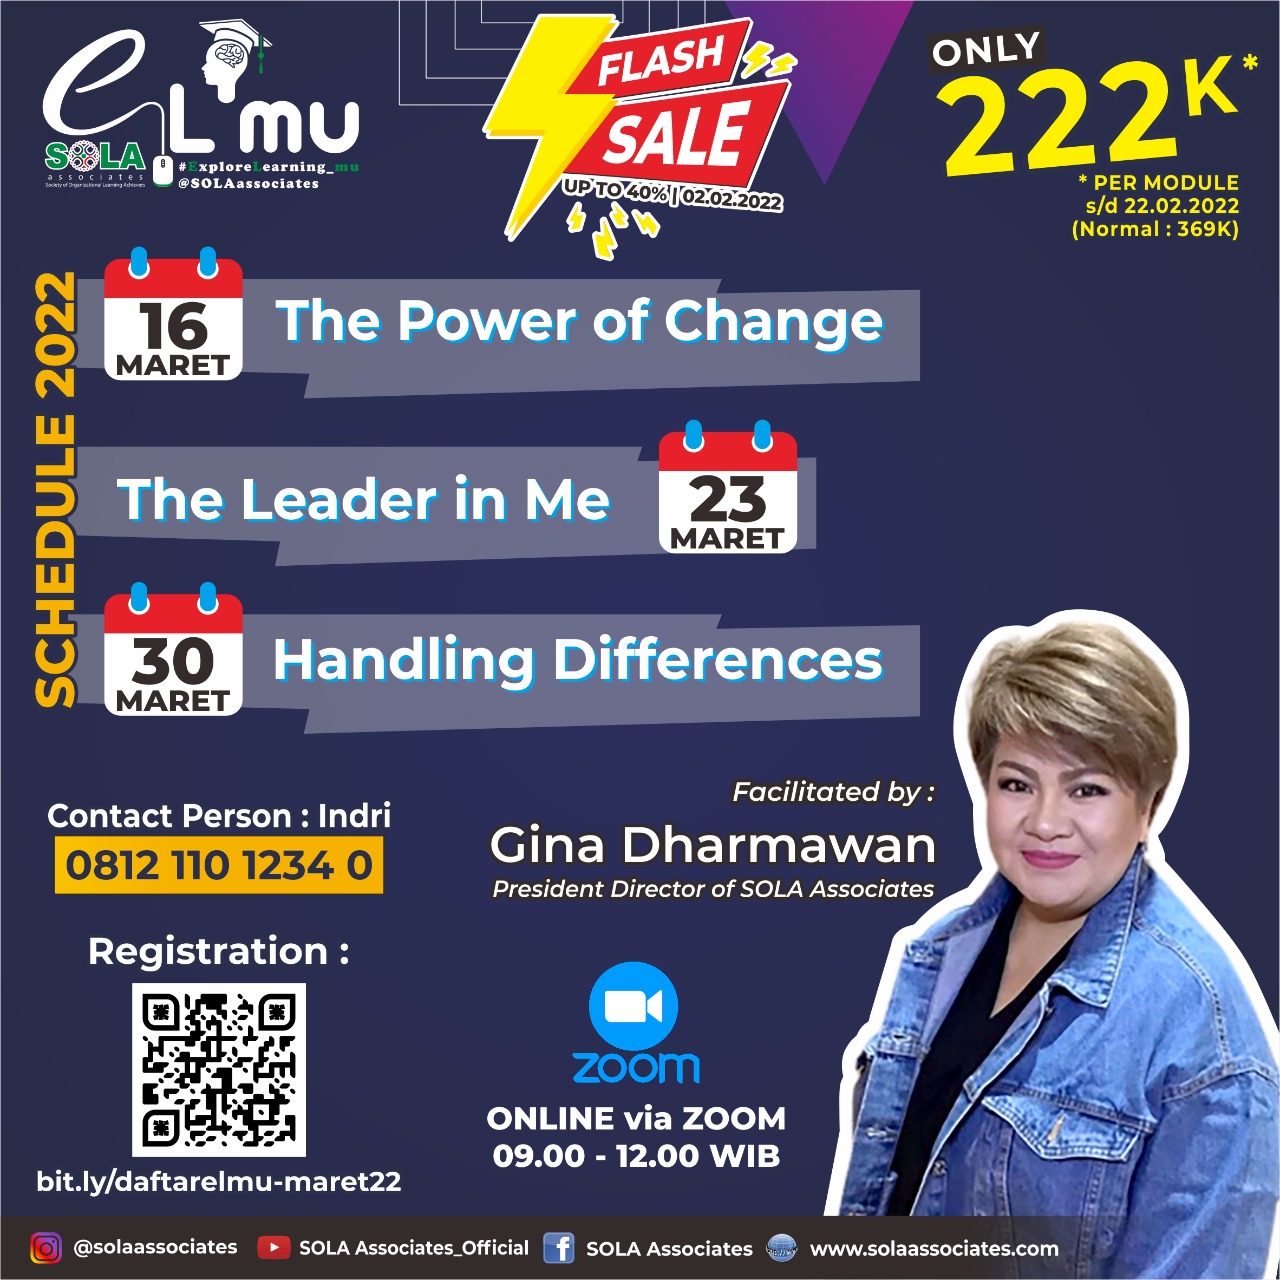 the-power-of-change---elmu-16march2022